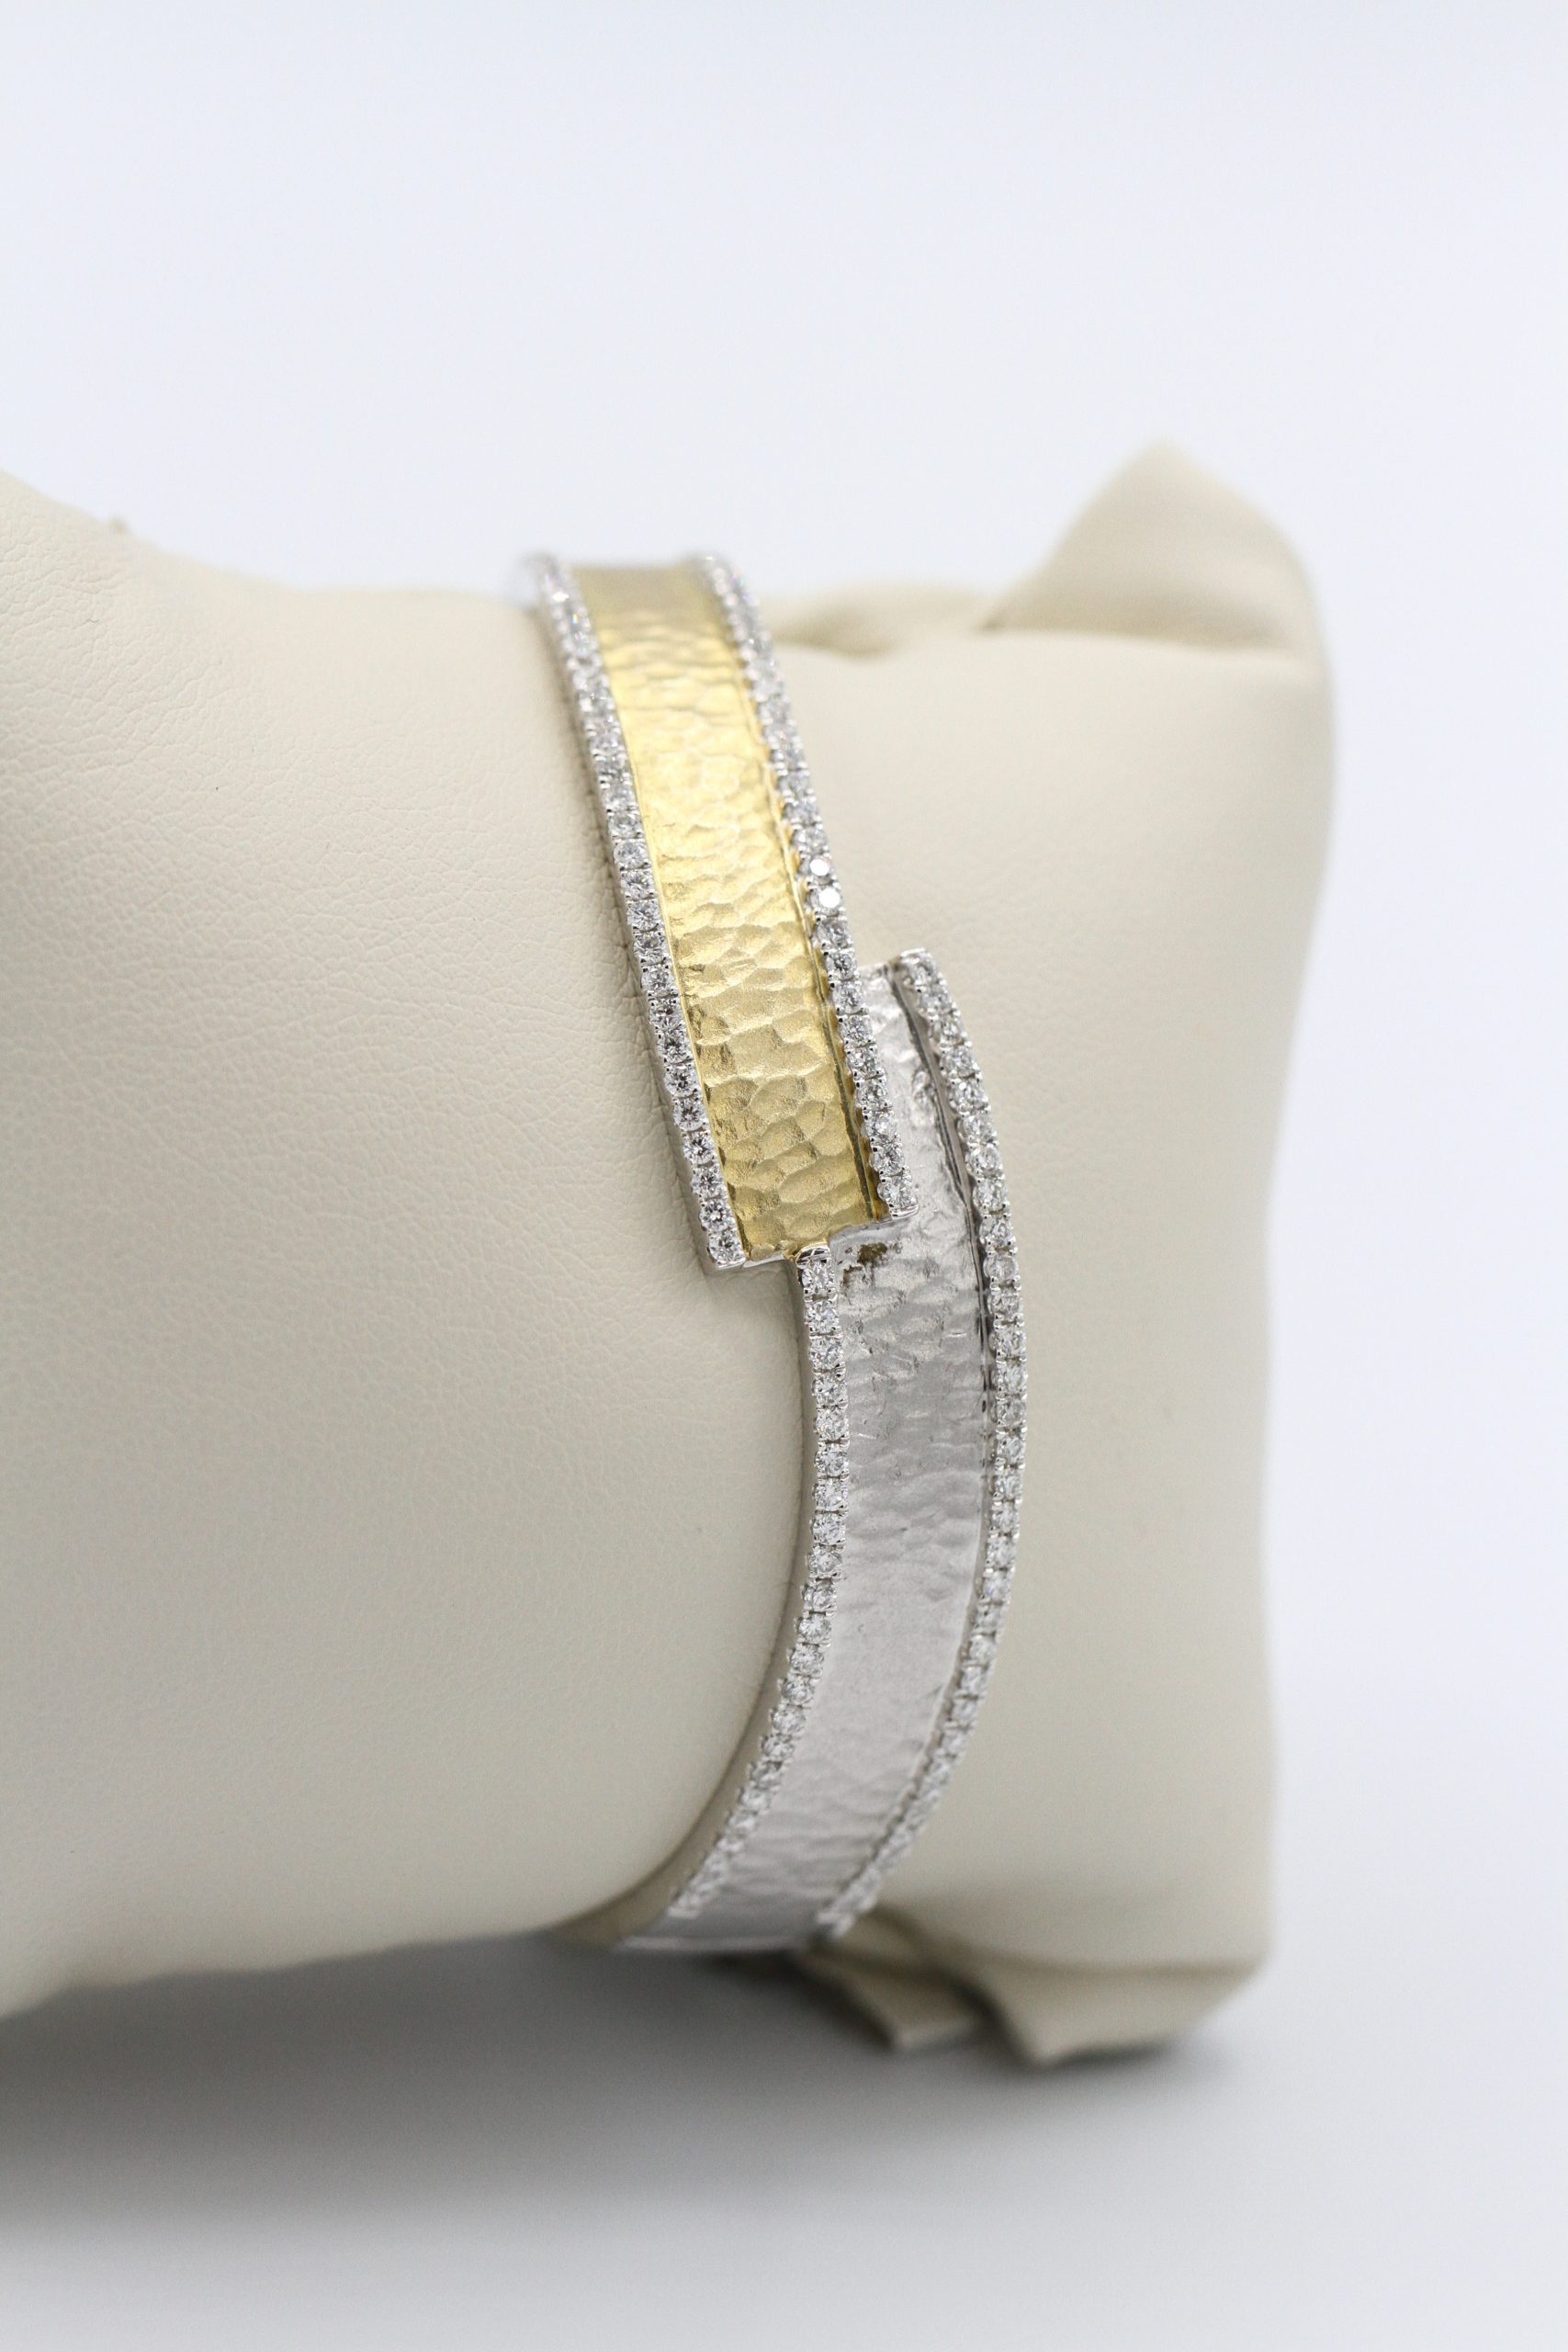 A gold and silver bracelet